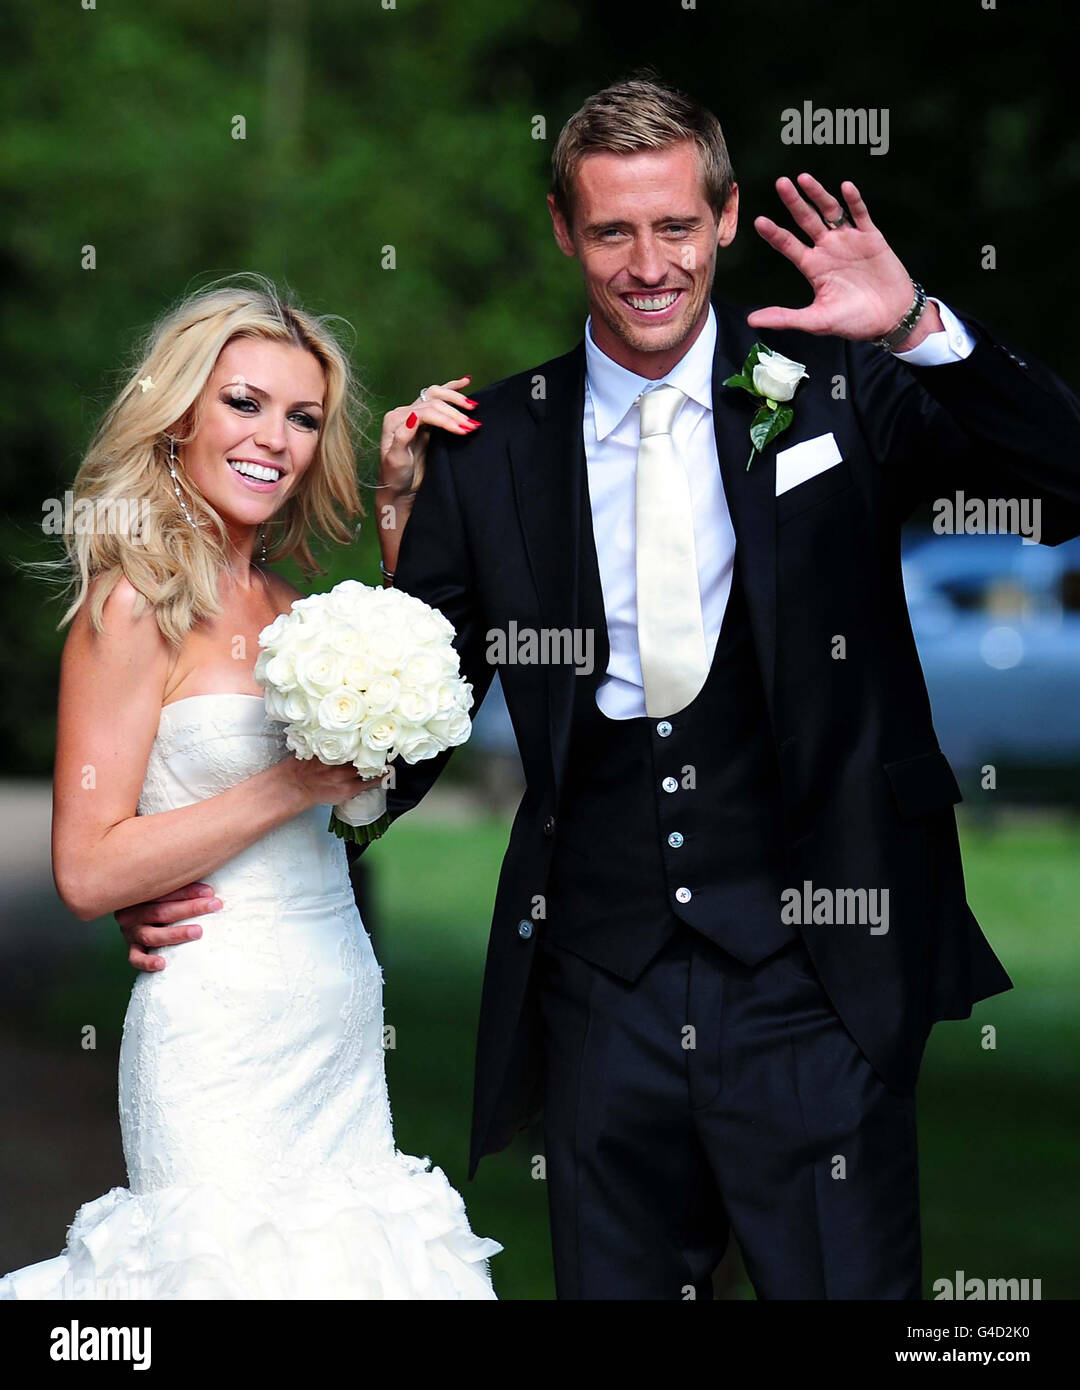 Footballer Peter Crouch and model Abbey Clancy in the grounds of Stapleford Park in Leicester following their wedding. Stock Photo